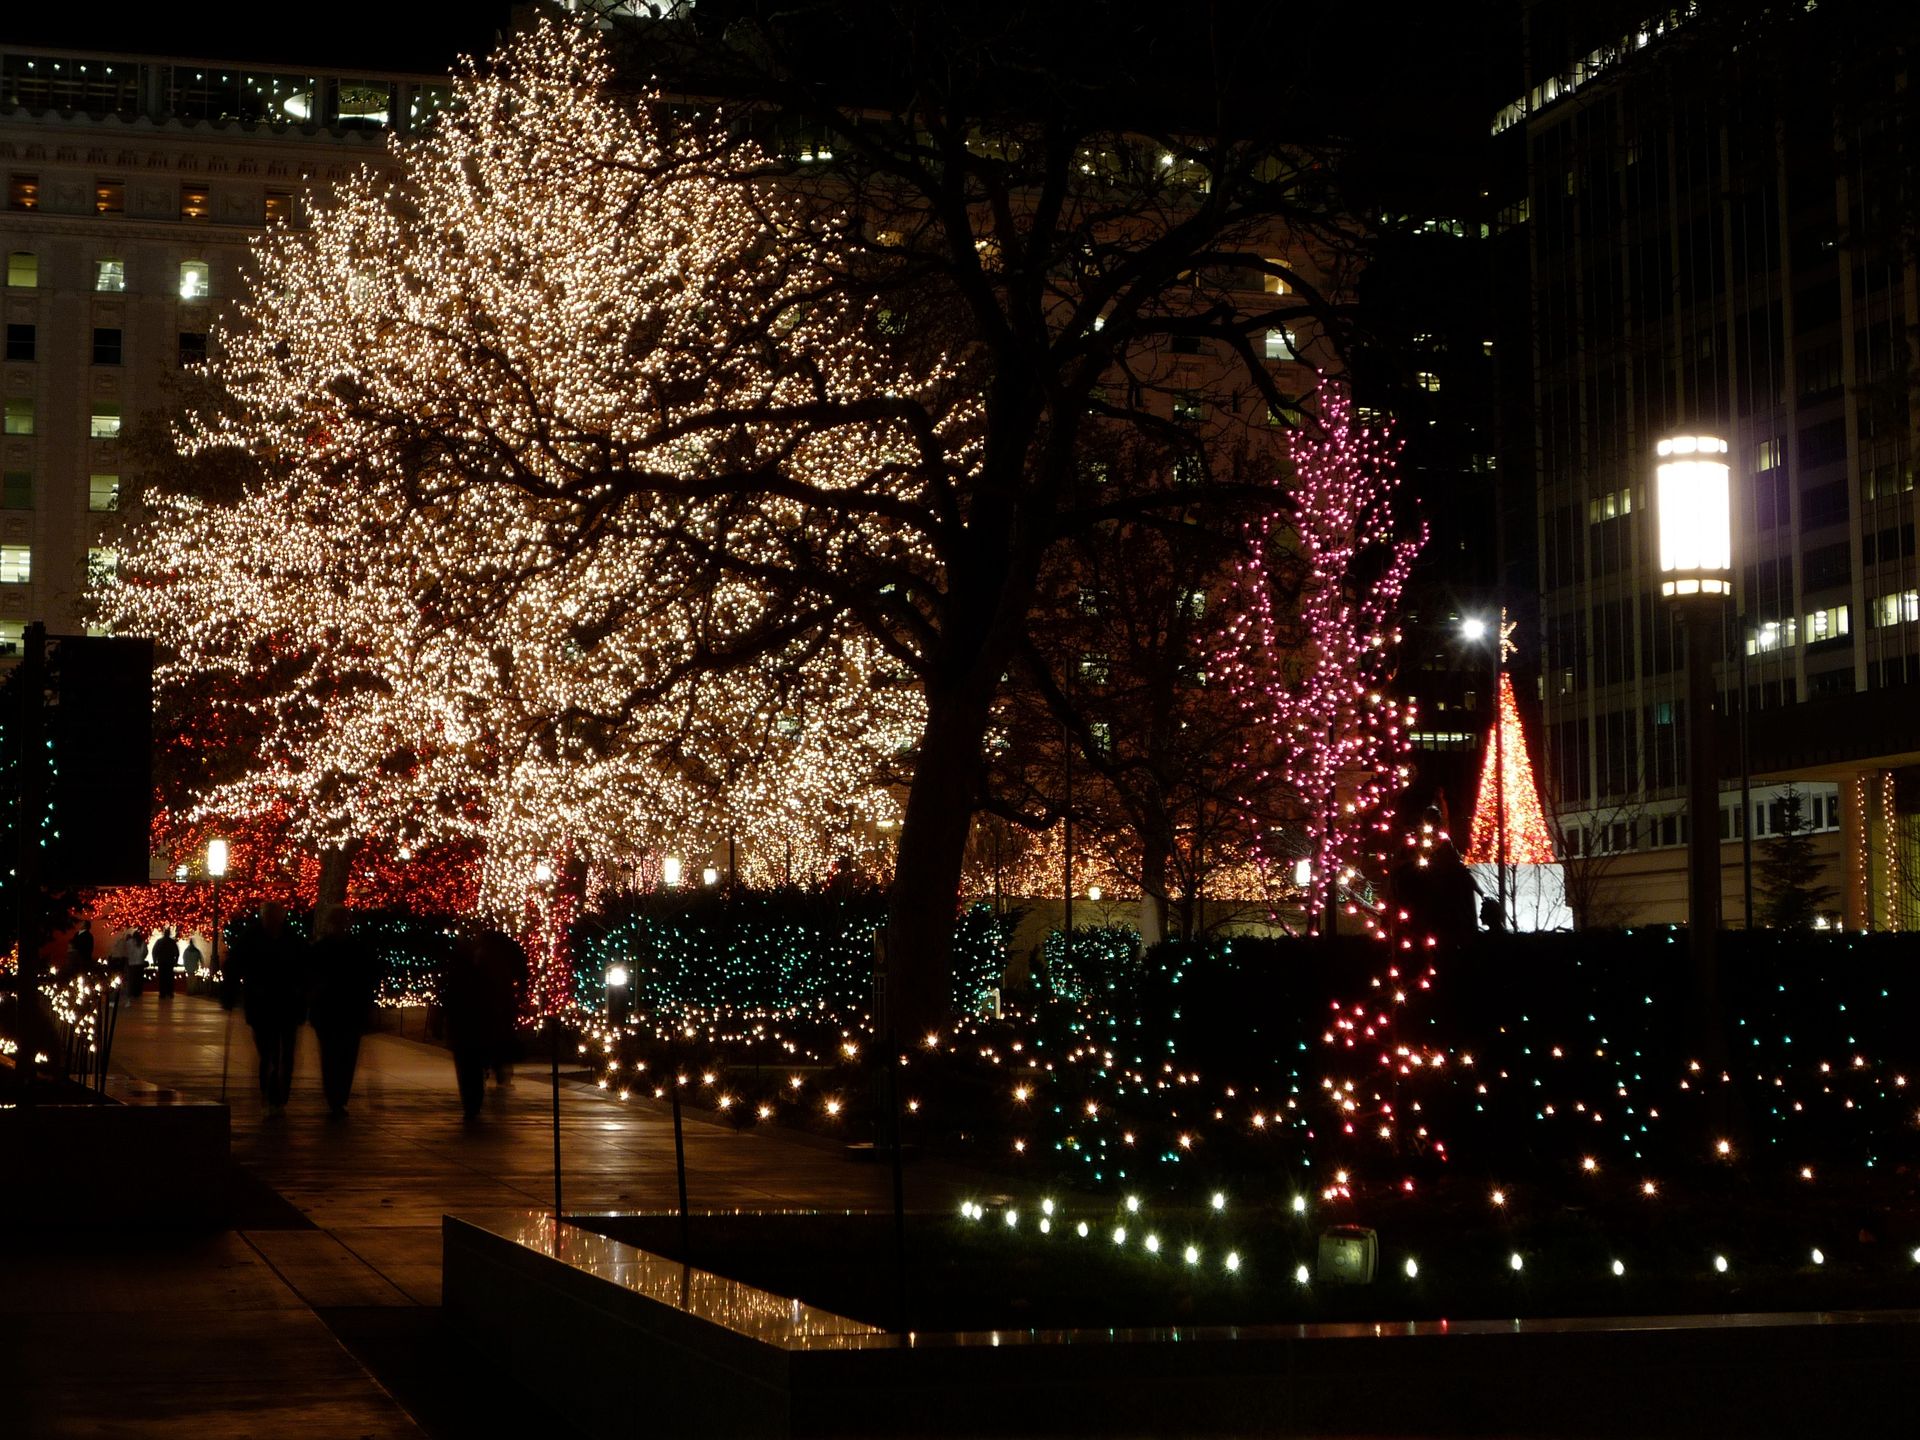 A view of a portion of the lights on Temple Square at night in December.  